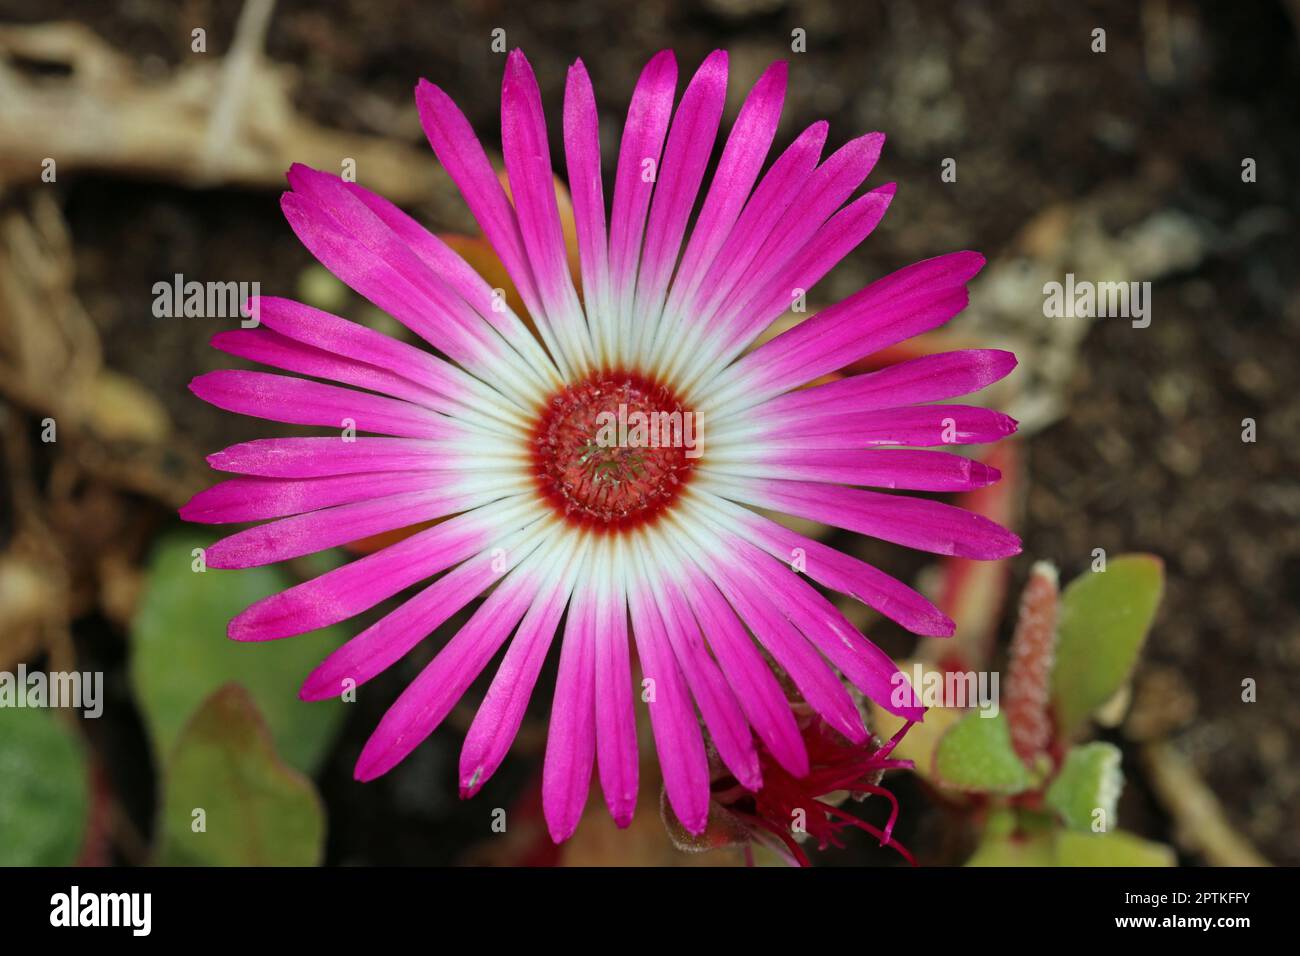 Pink livingstone daisy, Mesembryanthemum criniflorum, flower in close up with a blurred background of leaves. Stock Photo